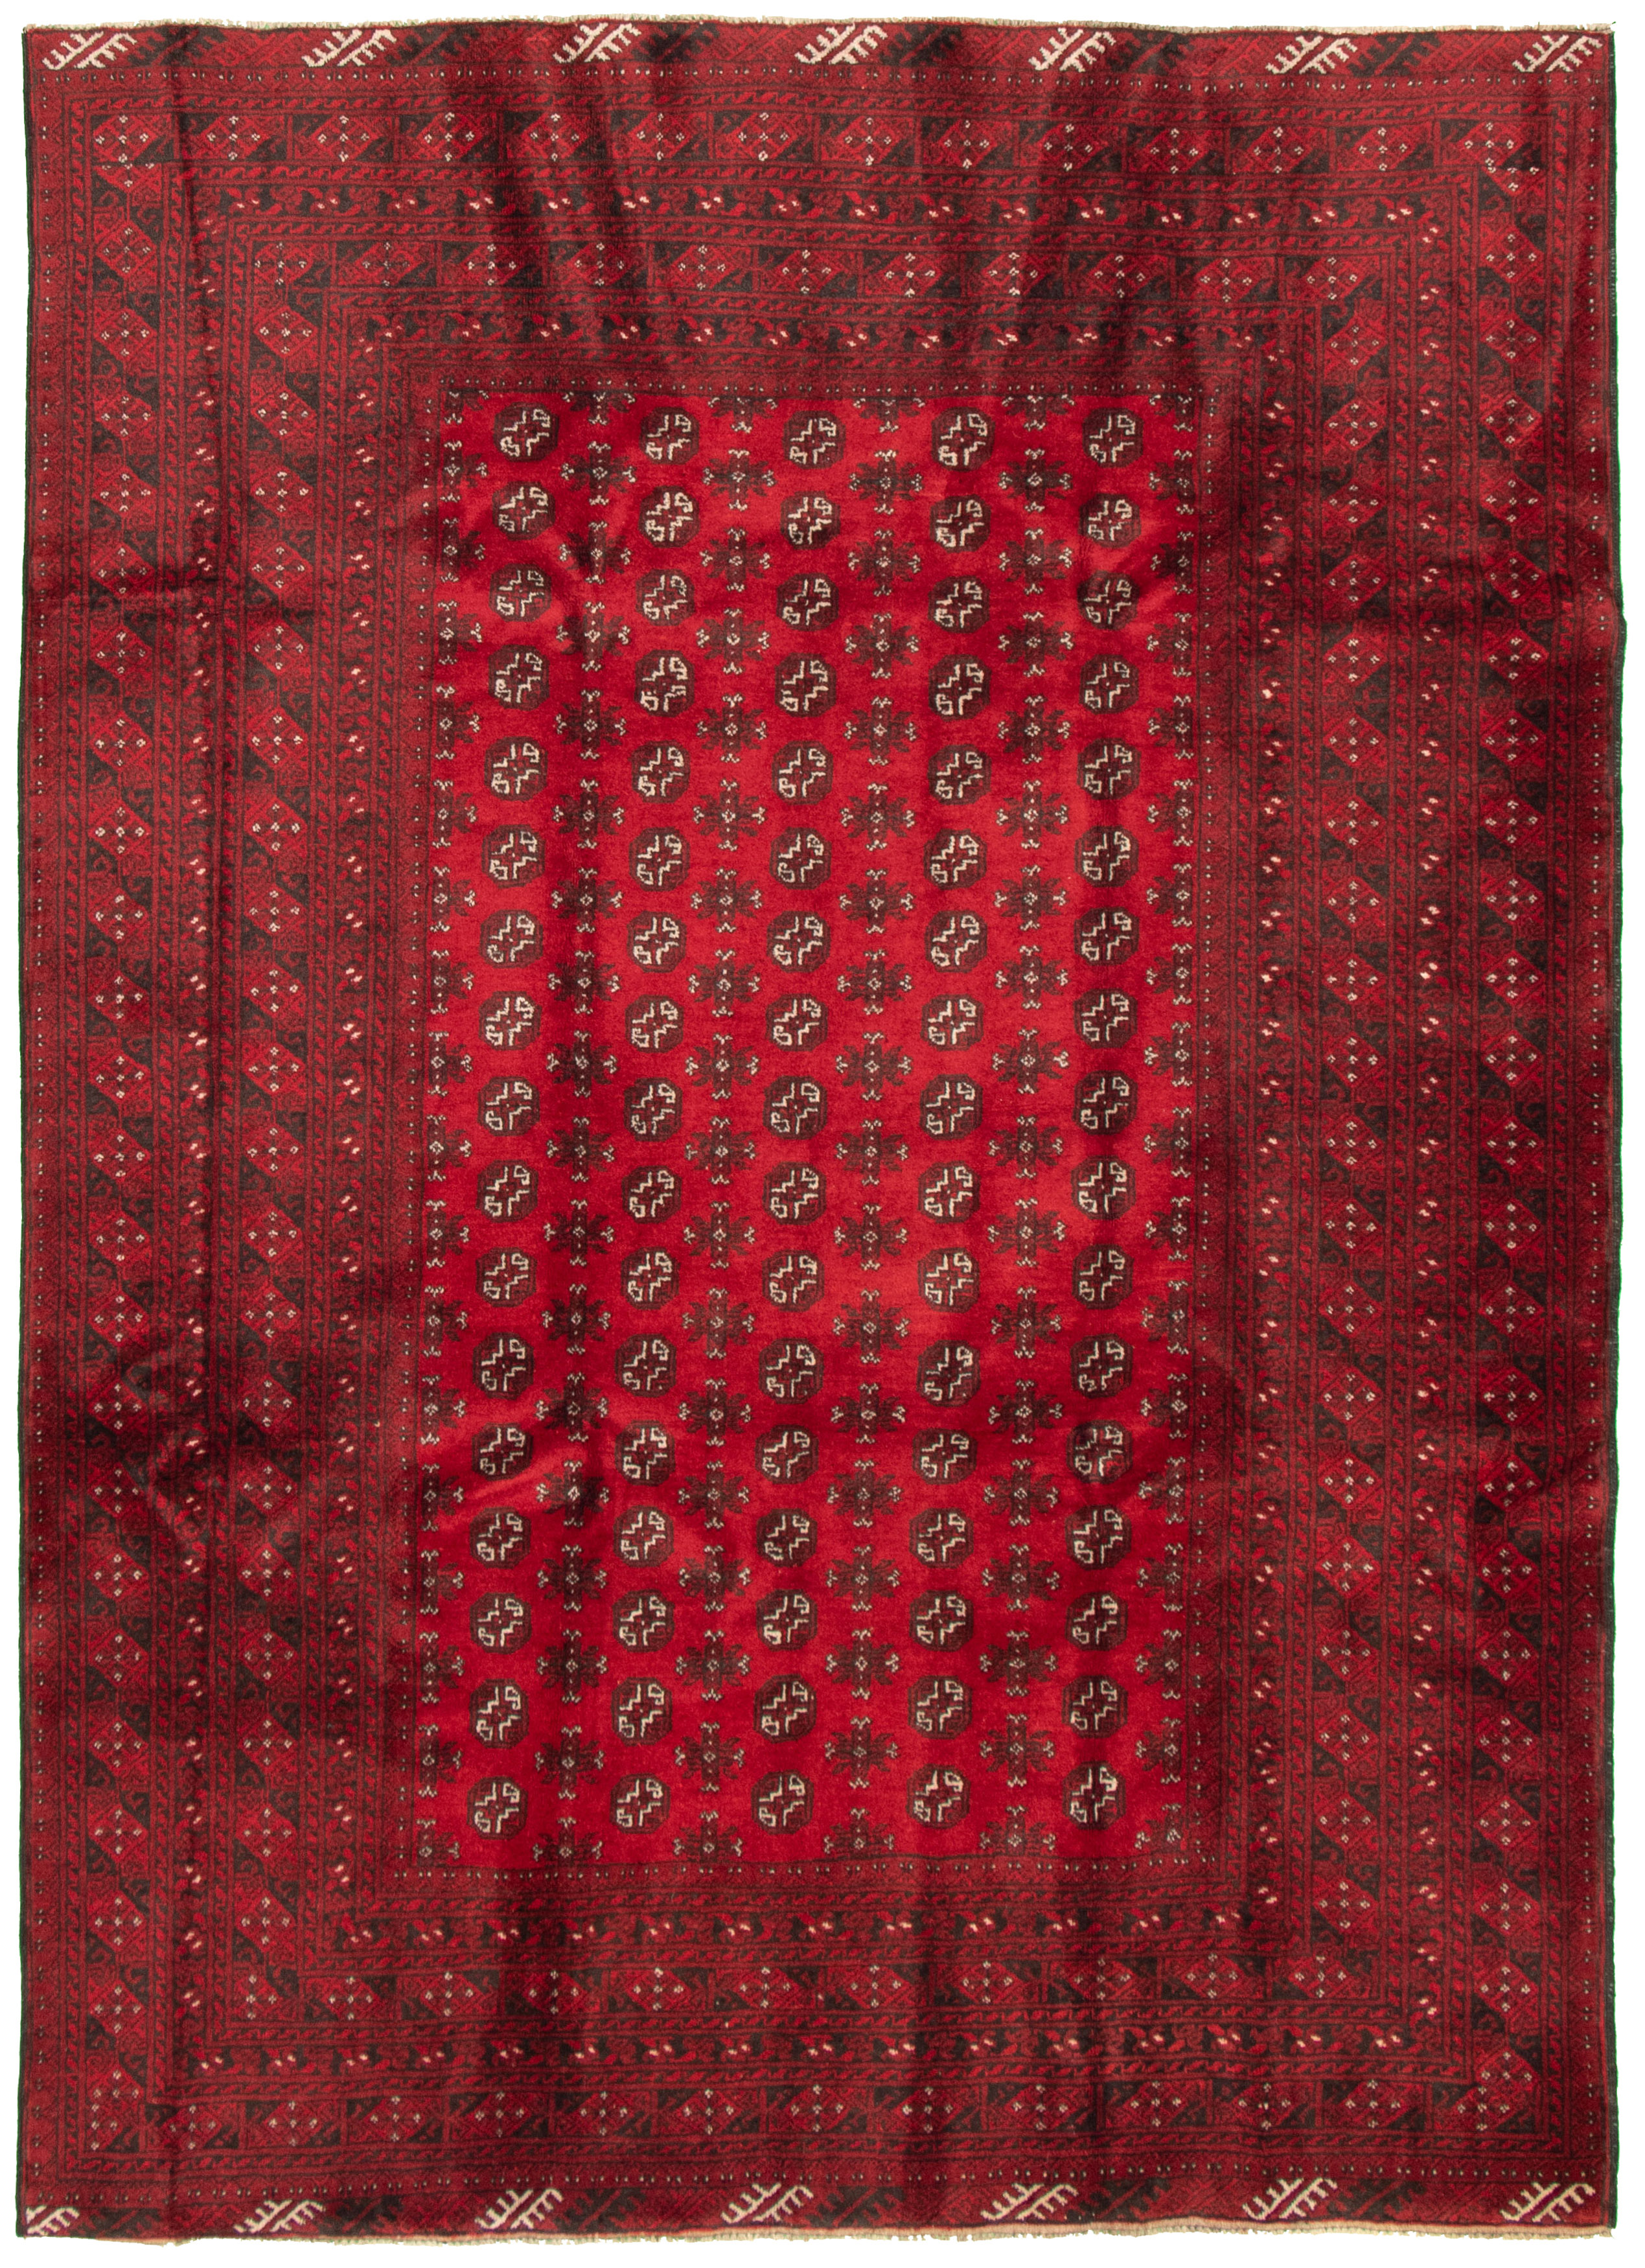 Hand-knotted Khal Mohammadi Red Wool Rug 6'5" x 8'11" Size: 6'5" x 8'11"  